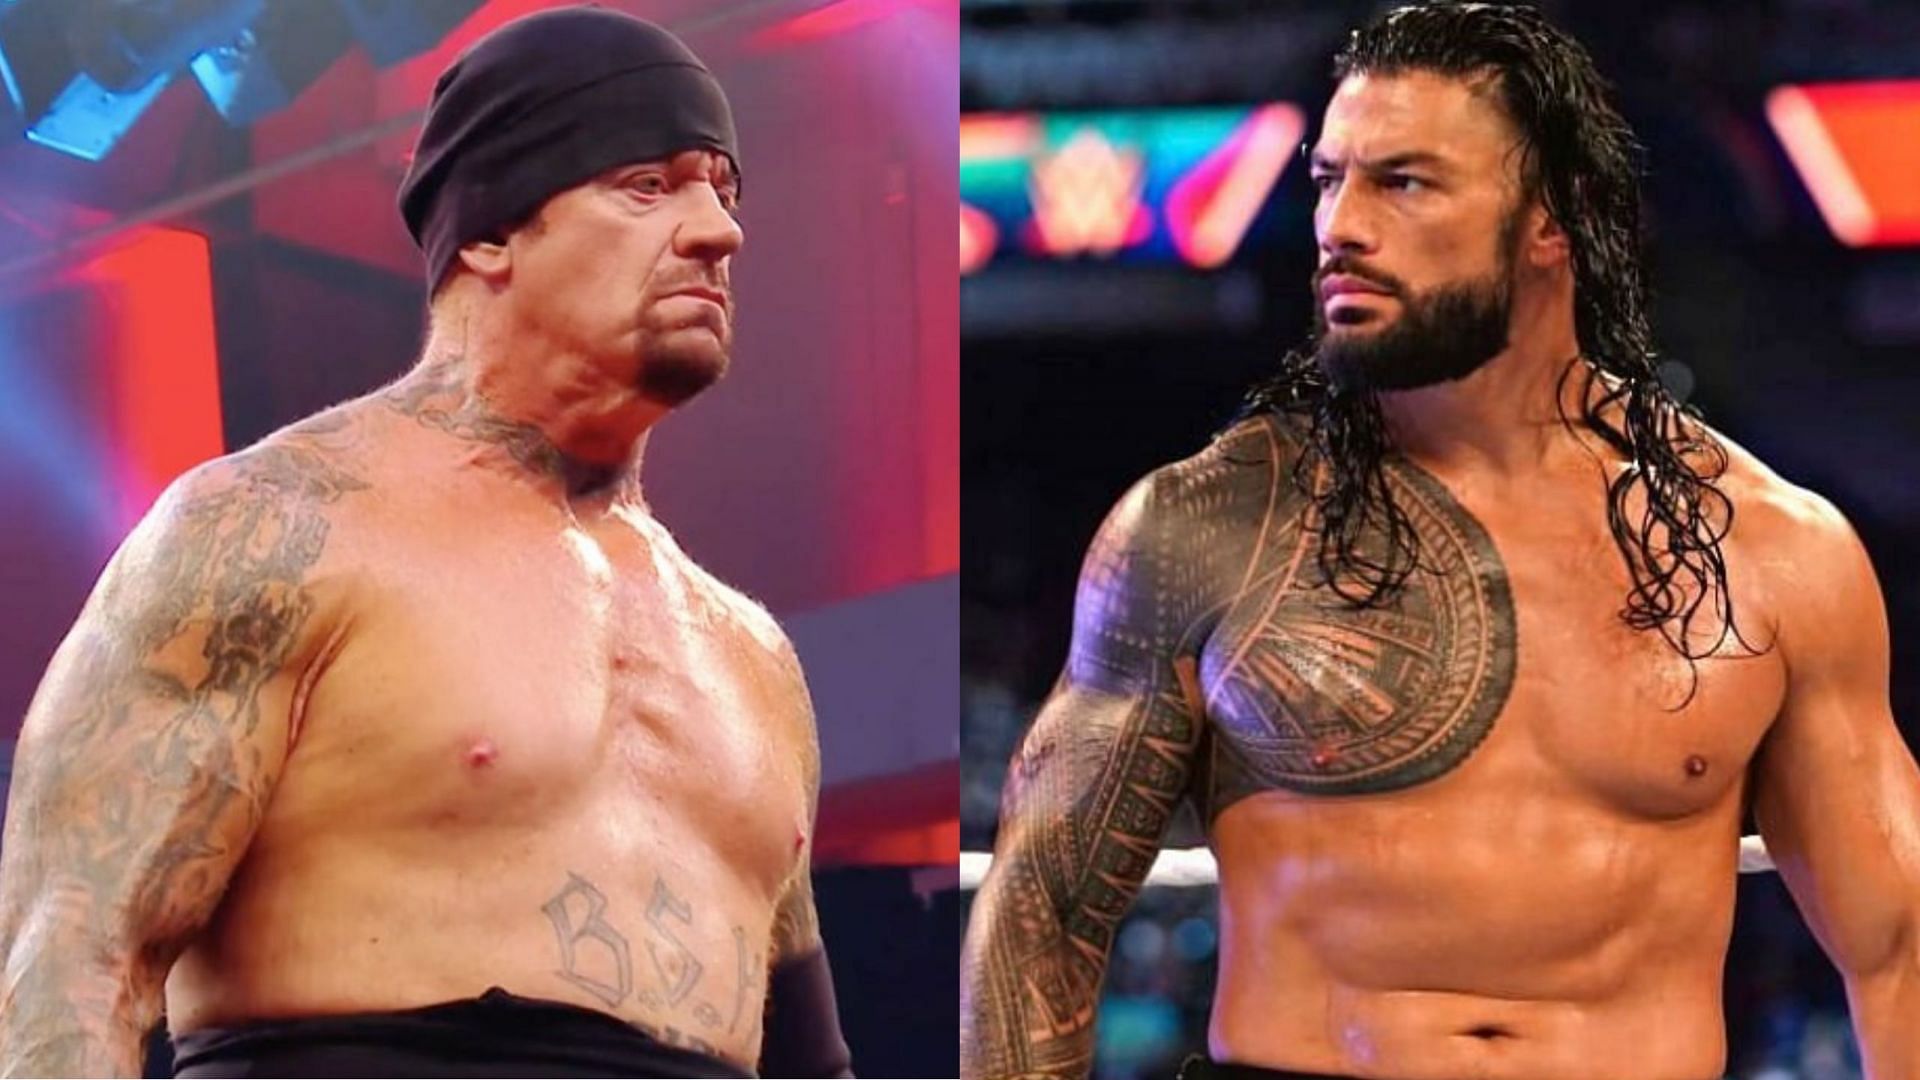 The Undertaker (left); Roman Reigns (right)